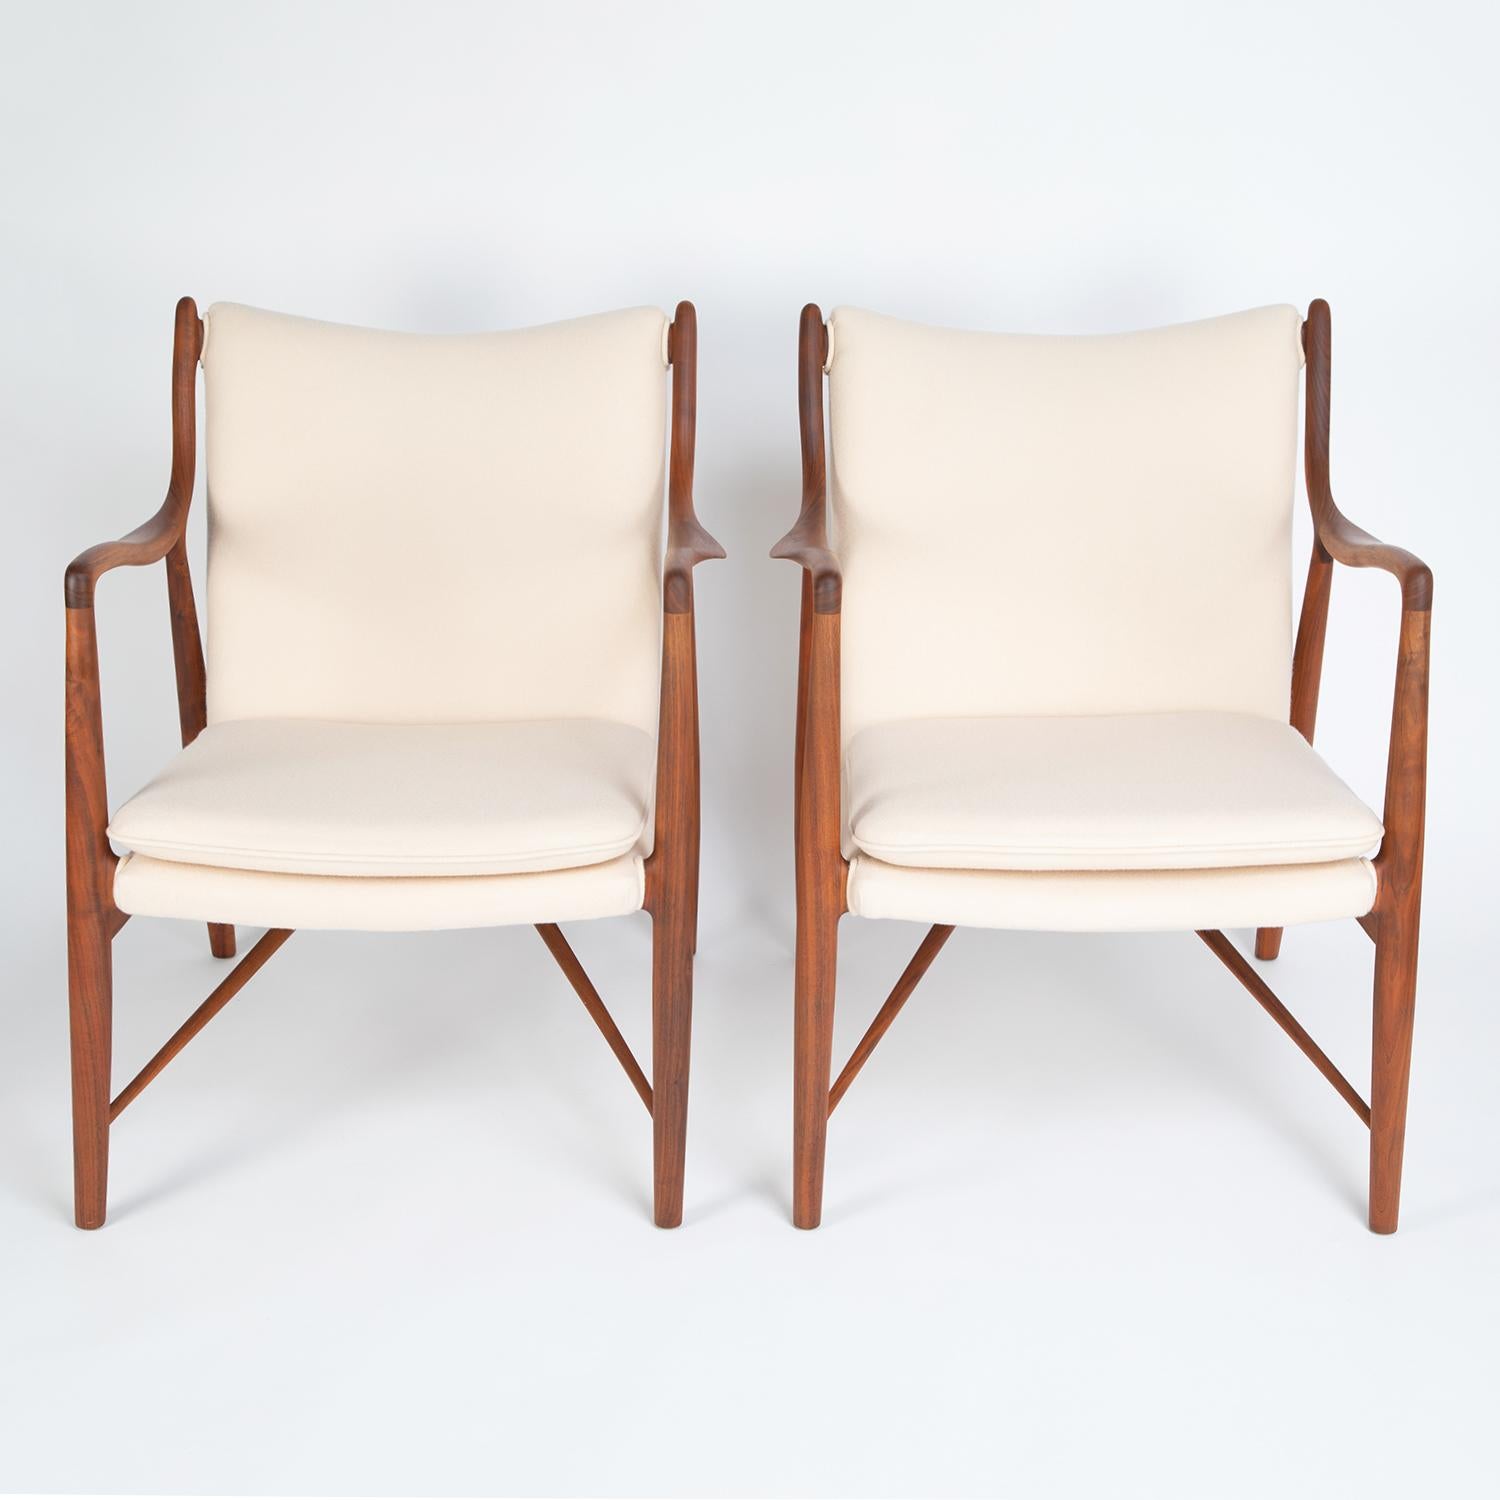 Pair of model NV-45 lounge chairs with sculptural walnut frames and upholstered seats and backs by Finn Juhl (Denmark) for Baker Furniture, American, 1950s. These chairs were originally produced by Neils Vodder in Denmark and subsequently produced